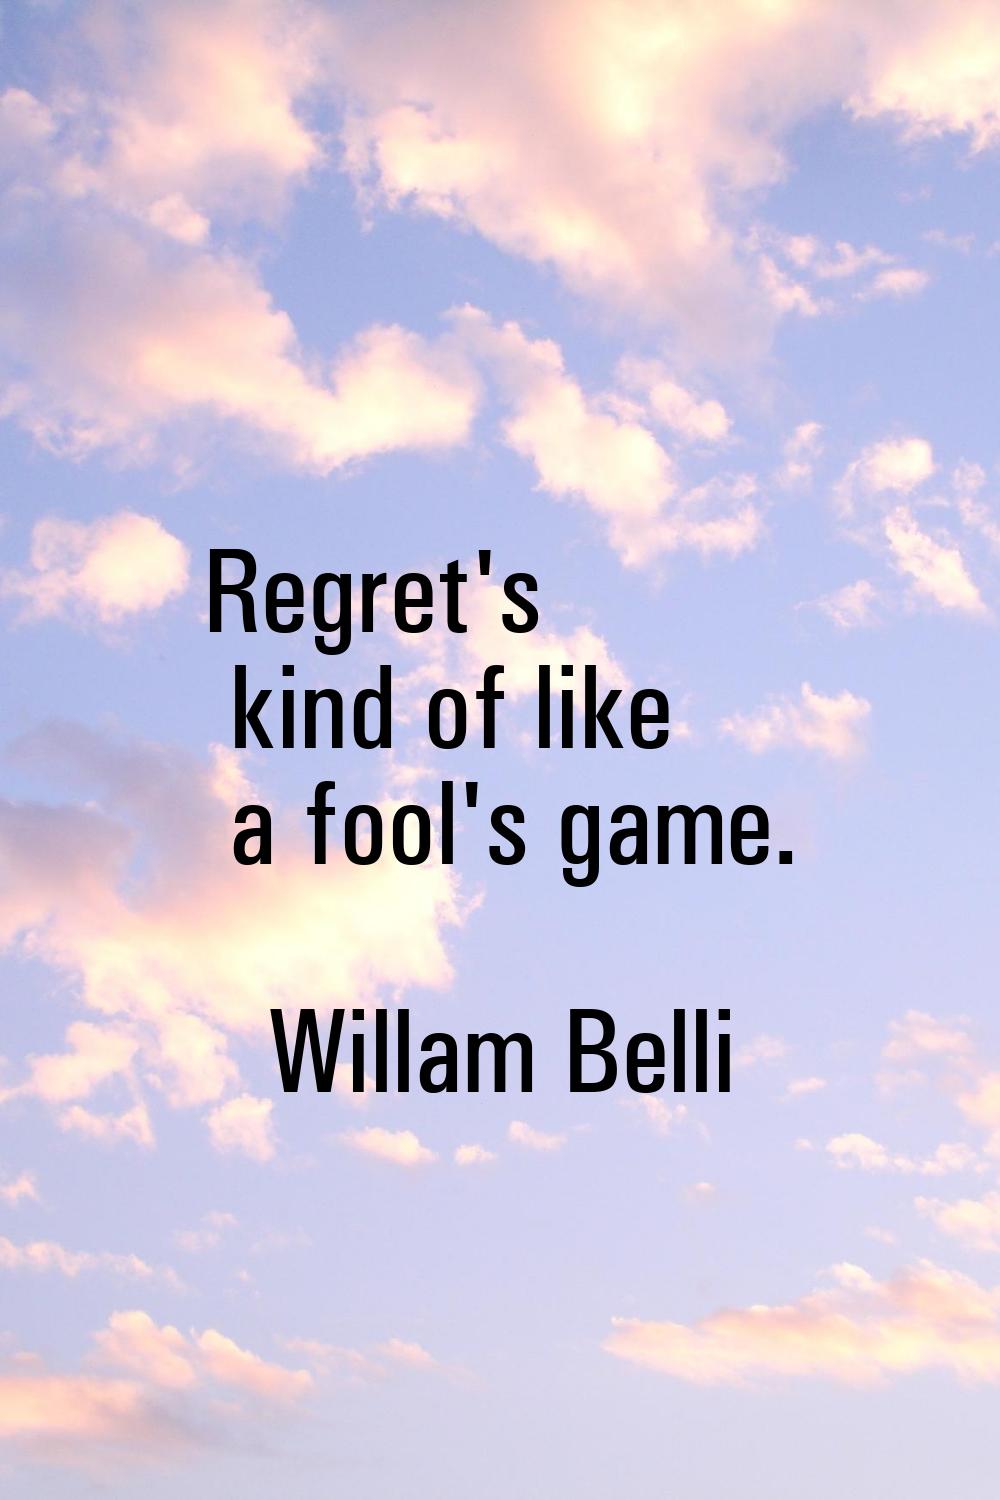 Regret's kind of like a fool's game.